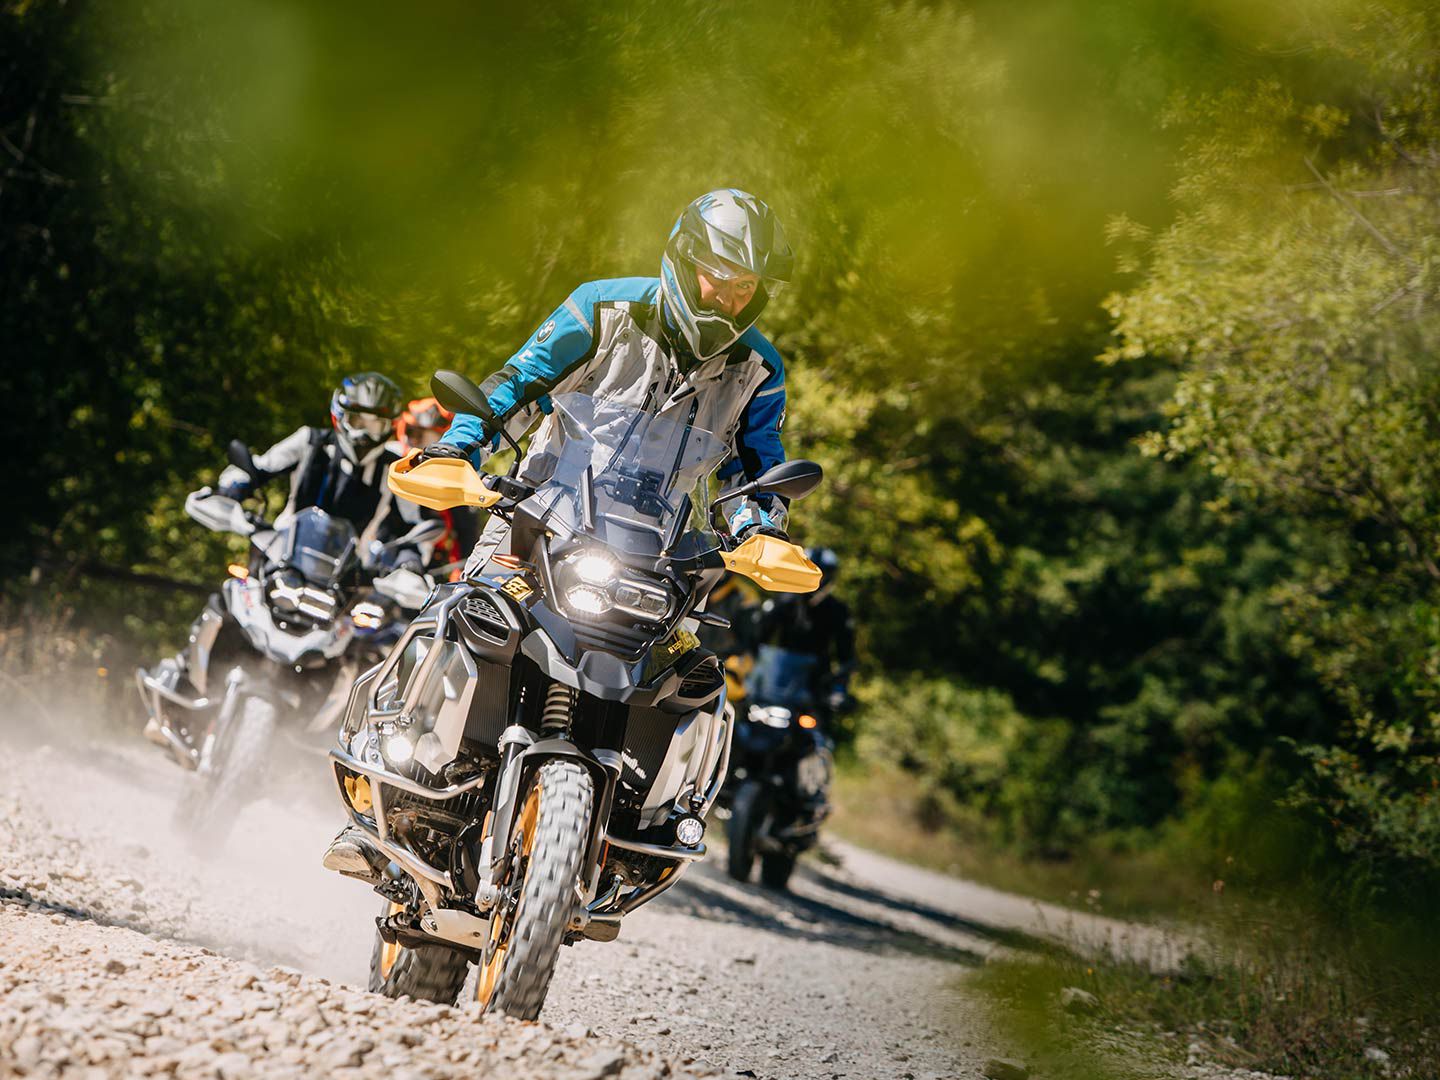 The BMW R 1250 GS Adventure: Sophisticated and rugged, just like you.